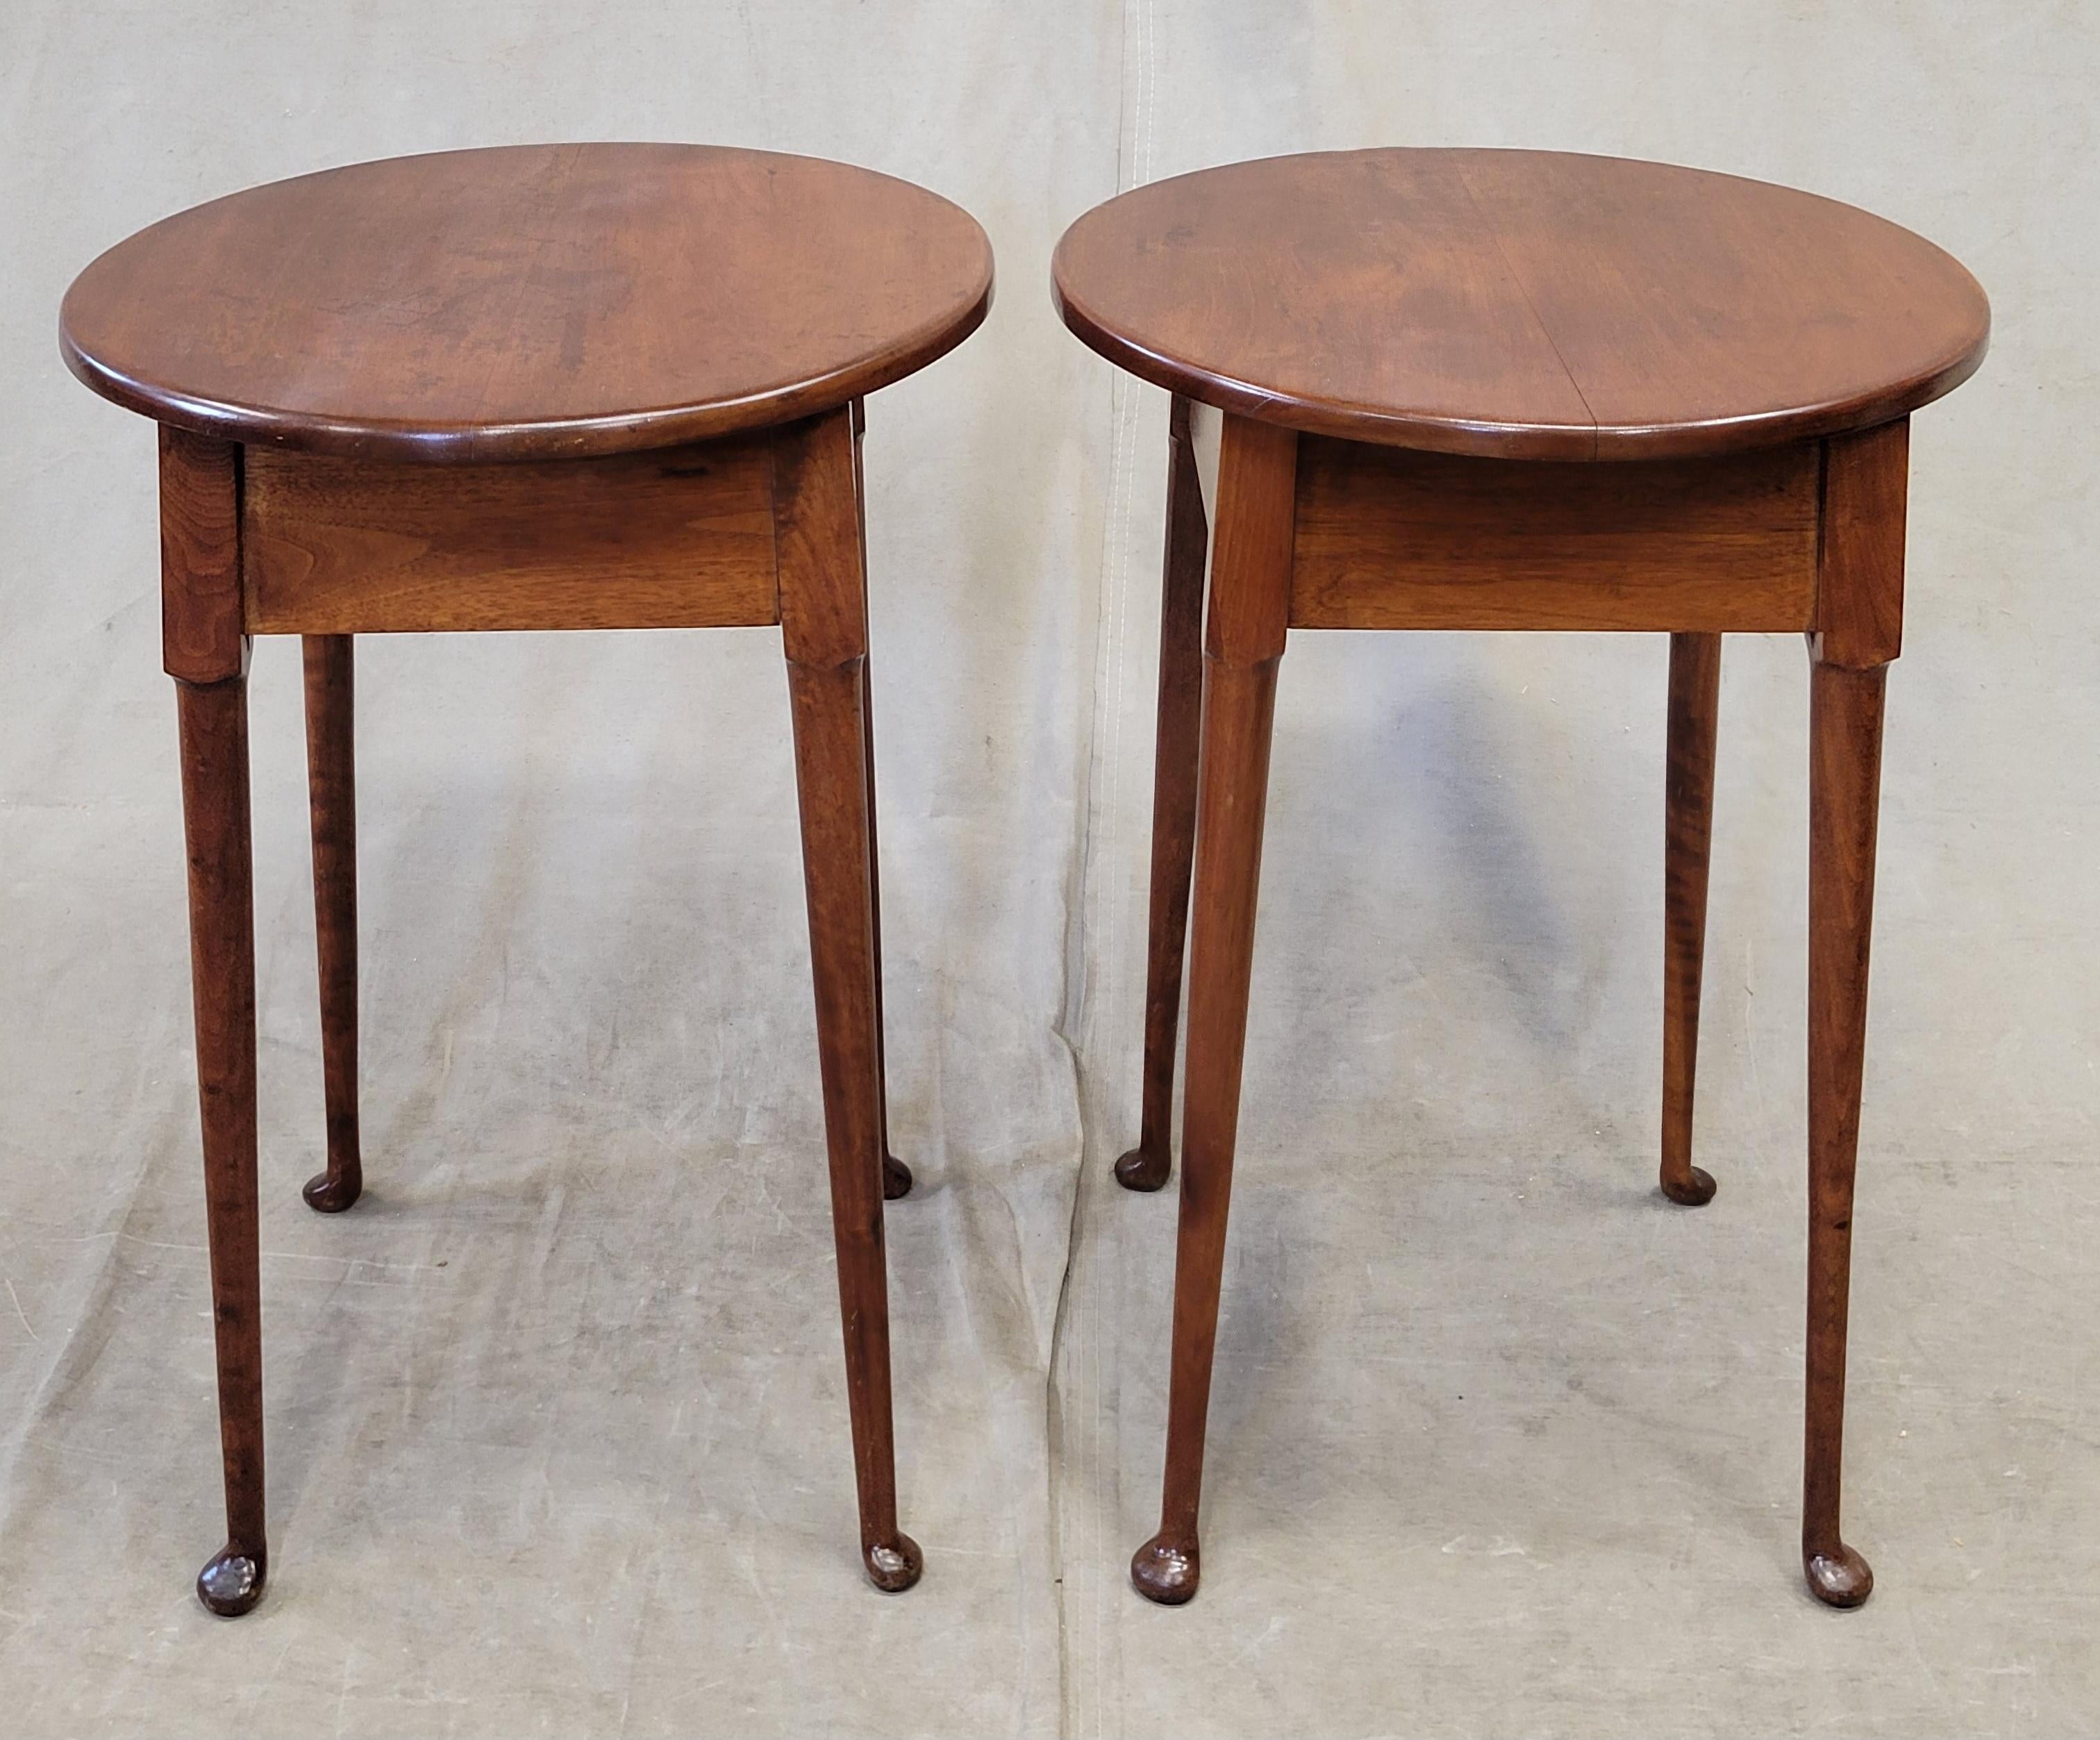 French Provincial Vintage French Oval Pad Foot Side Tables, a Pair